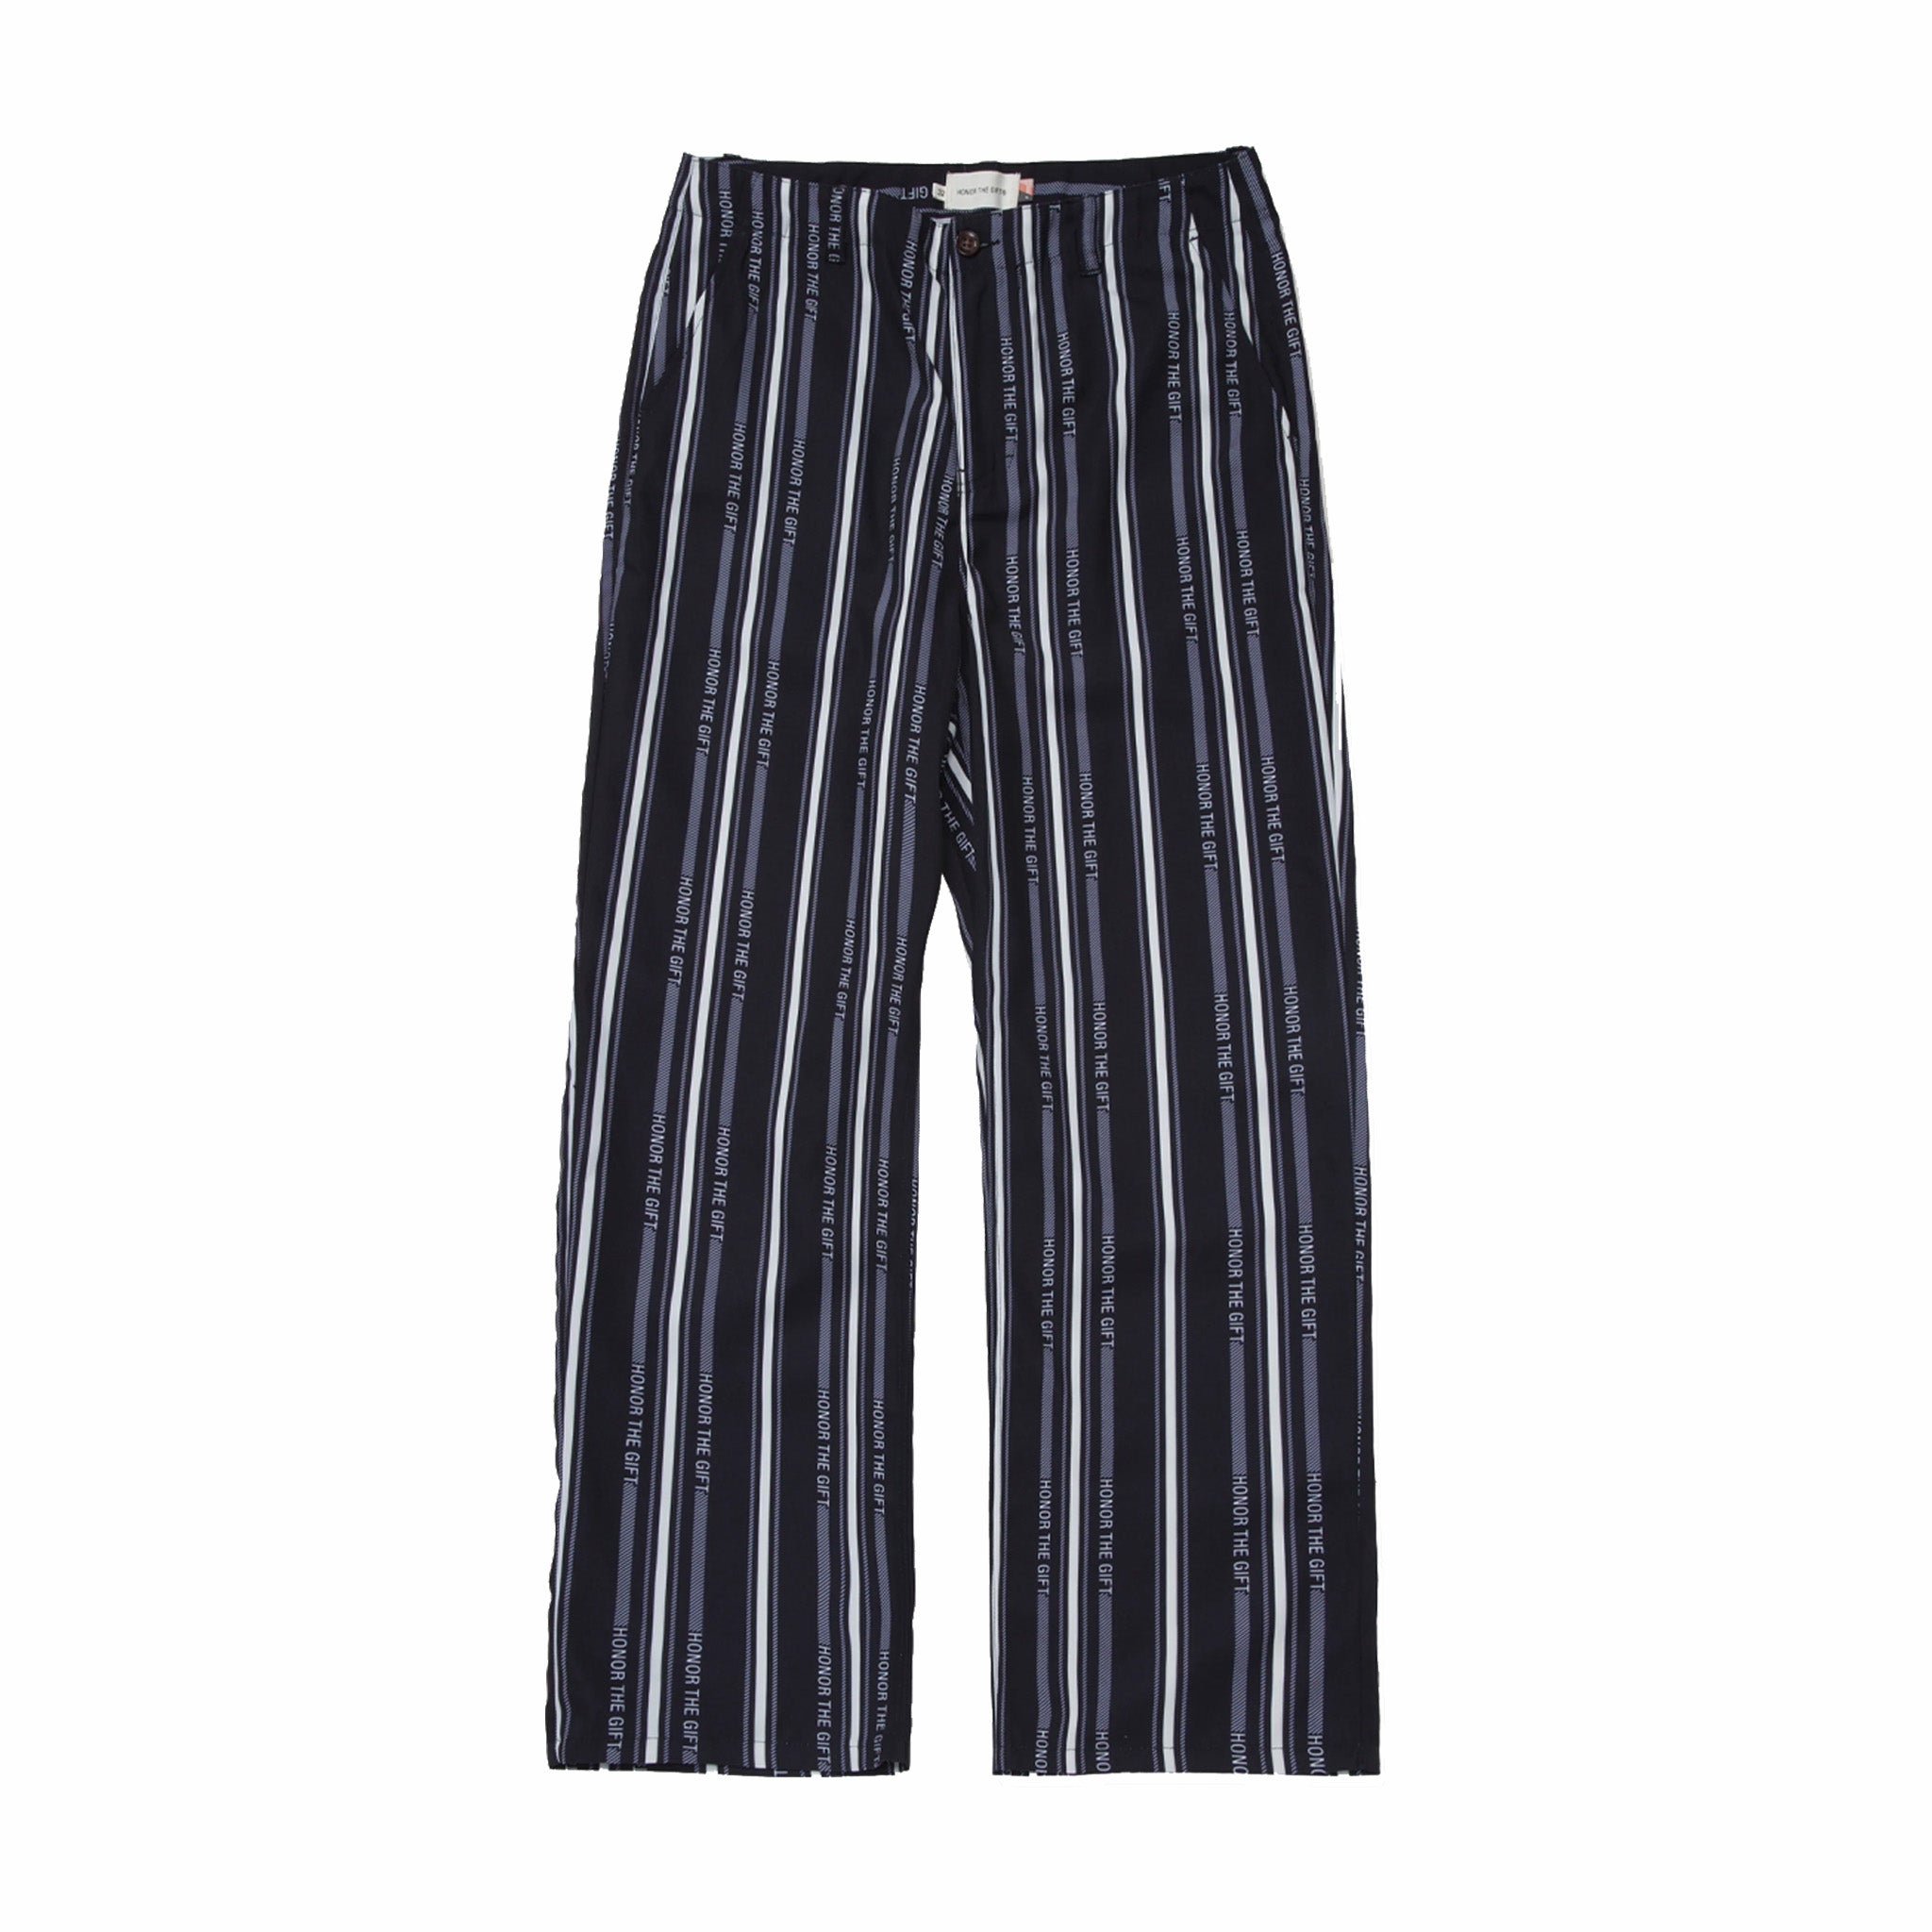 Honor The Gift Honor Stripe Pant (Black) - August Shop